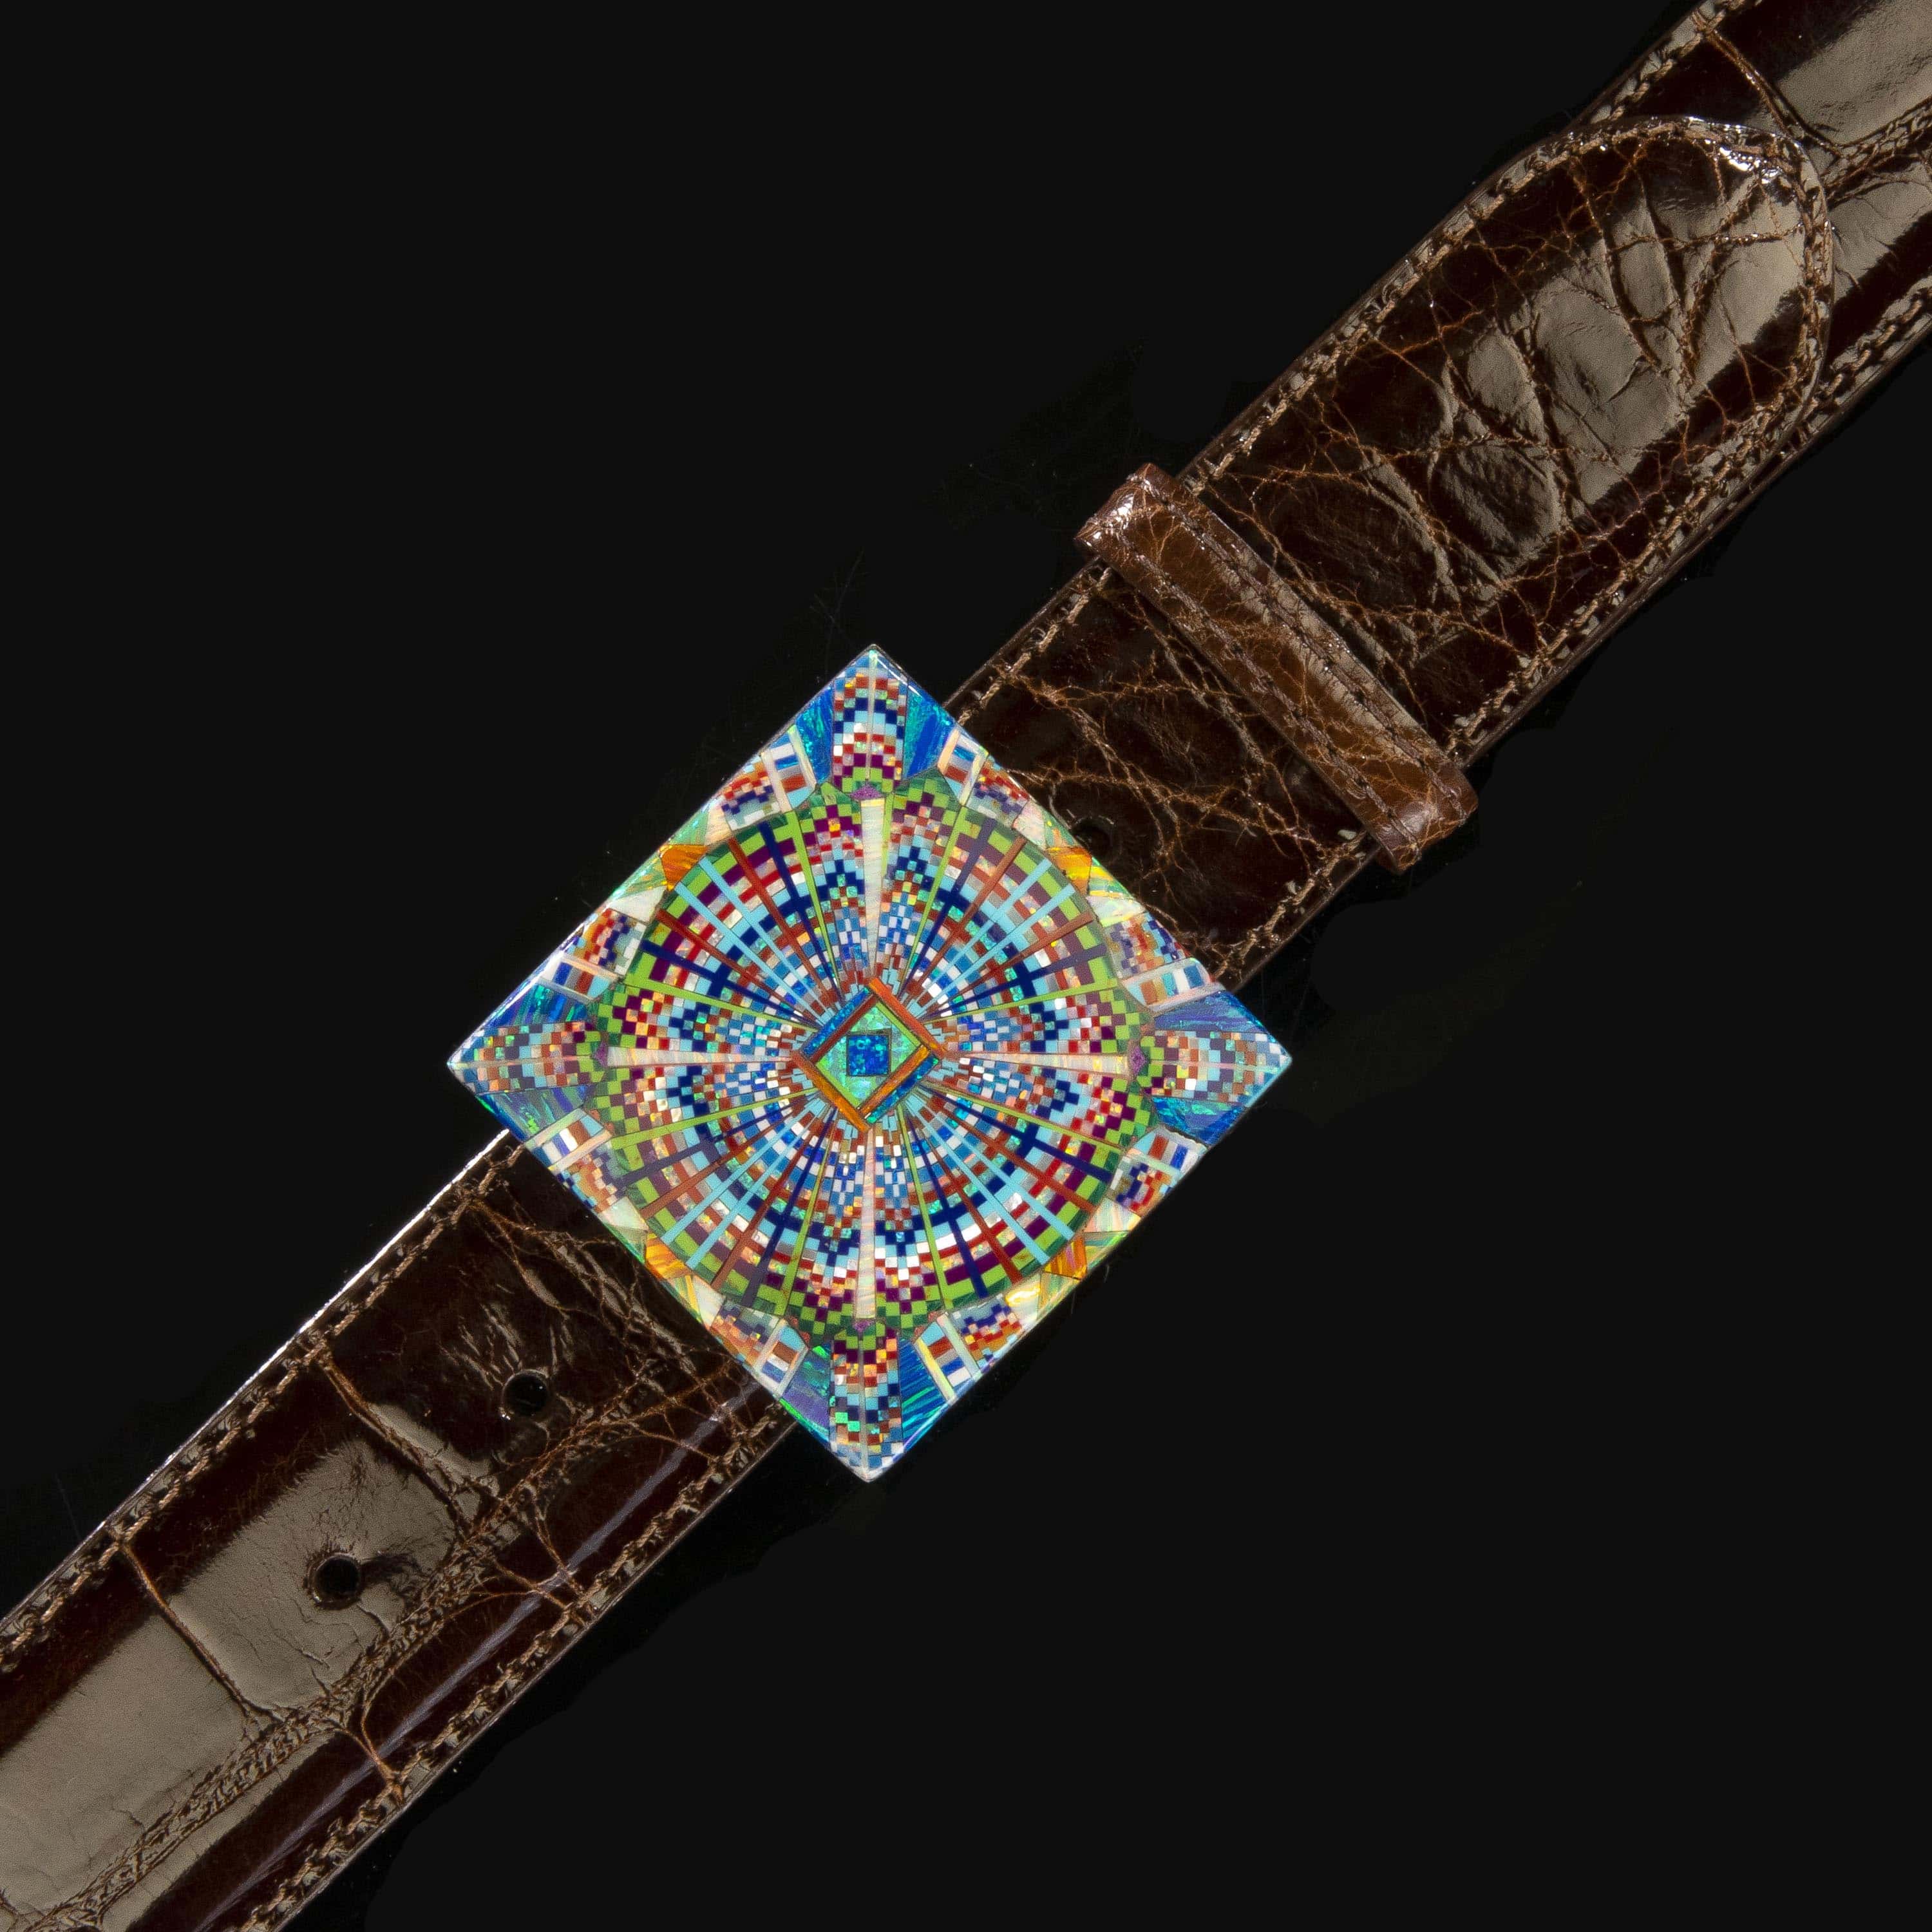 KALIFANO Southwest Silver Jewelry Multi Gem Opal Micro Inlay with Genuine Turquoise Handmade 925 Sterling Silver Square Belt Buckle AKBB1200.005